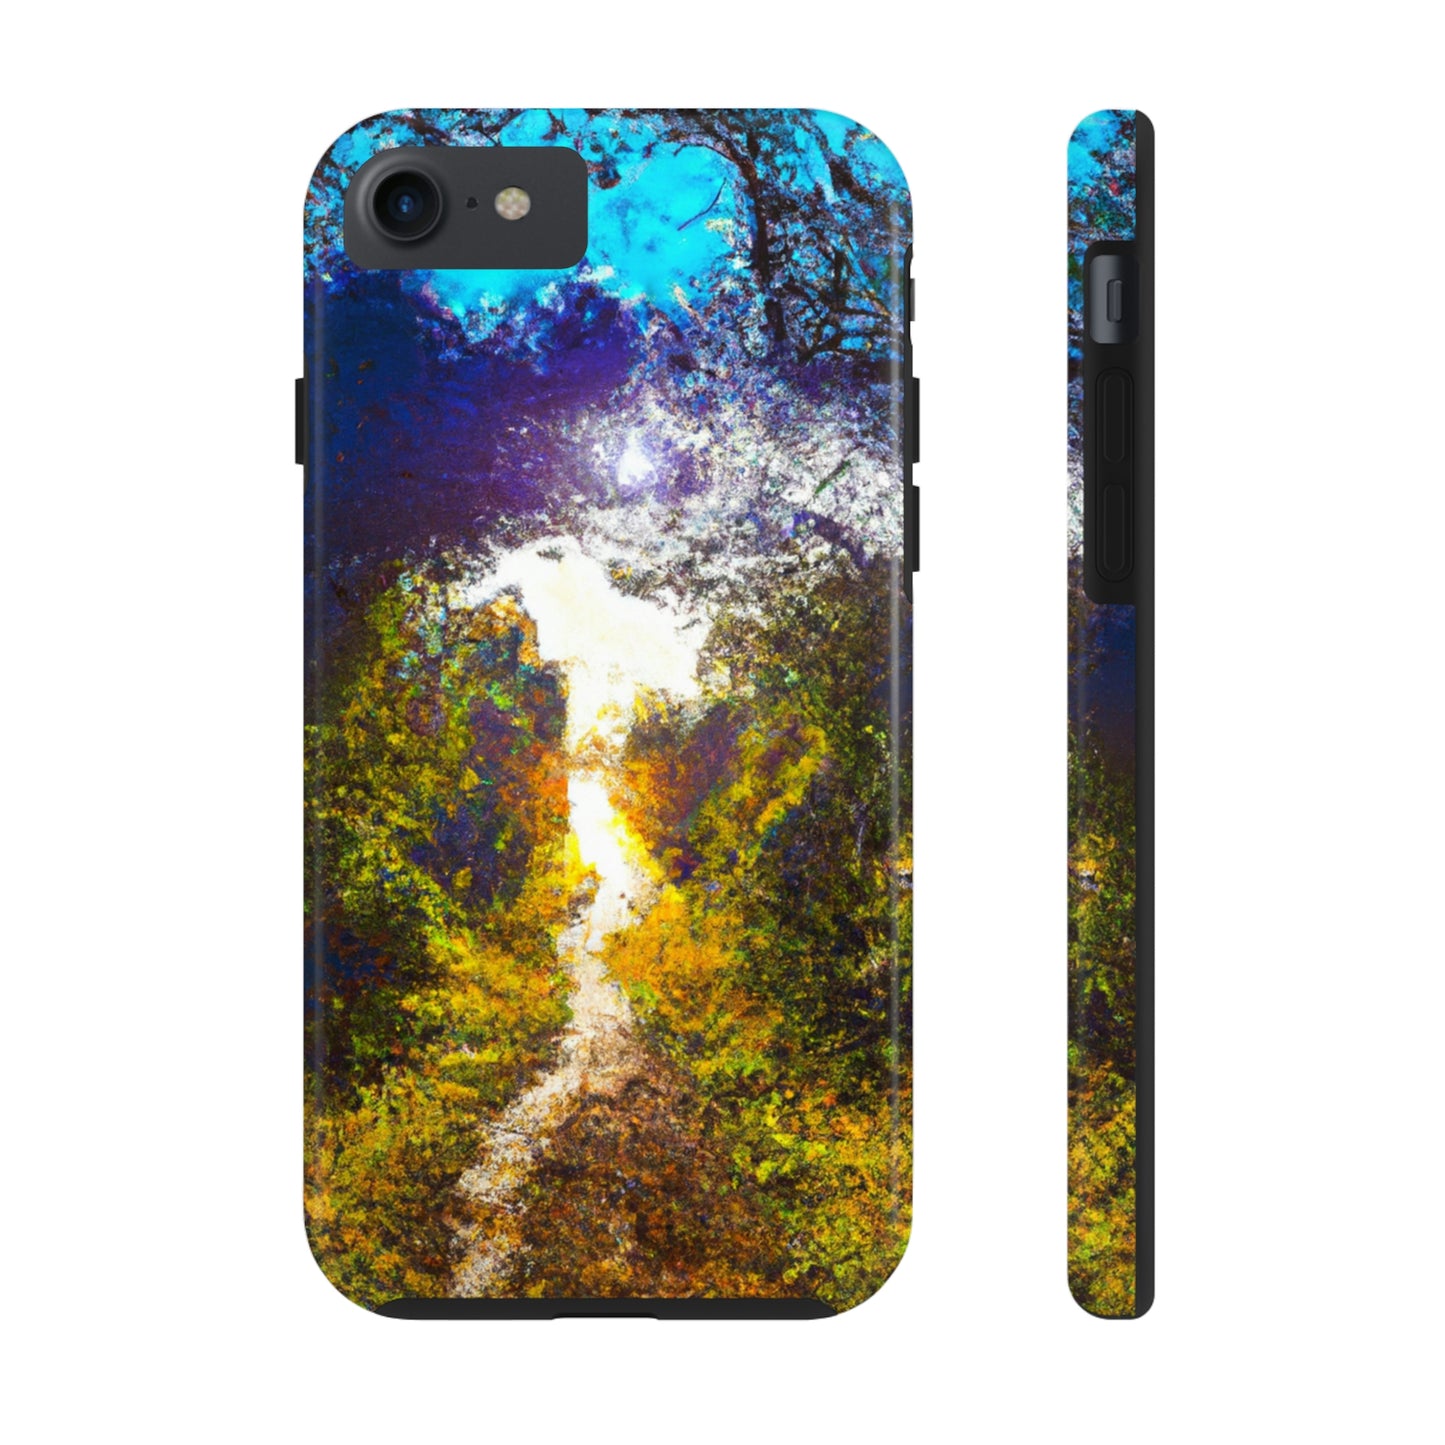 "A Beam of Light on a Forgotten Path" - The Alien Tough Phone Cases